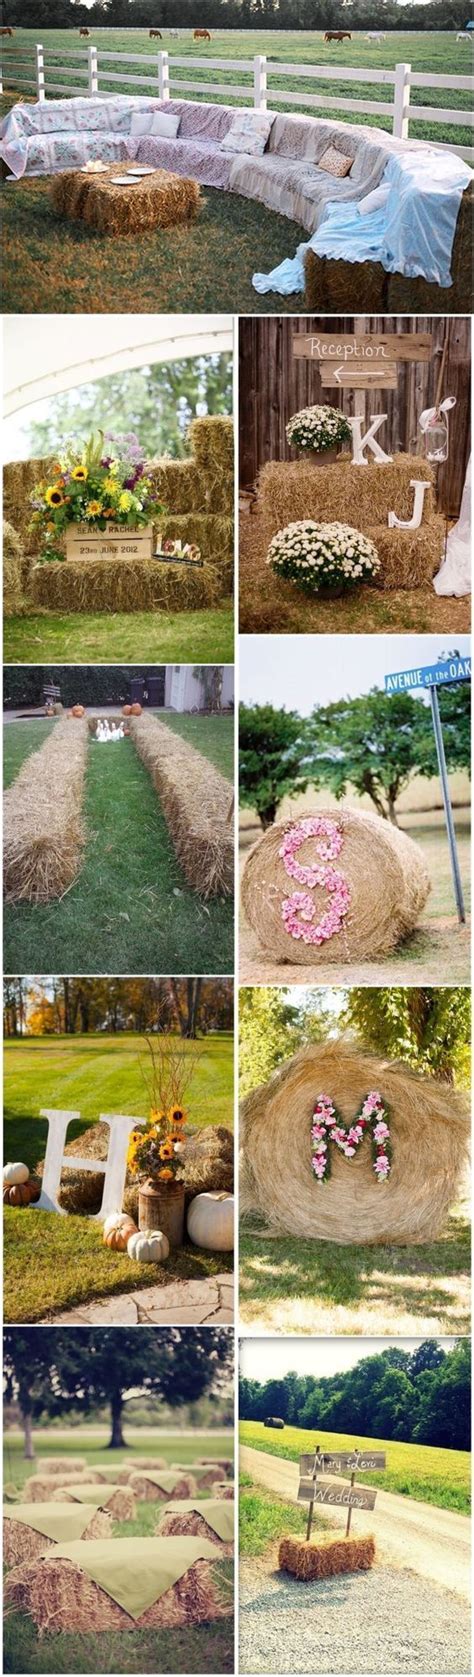 25 Chic Rustic Hay Bale Decoration Ideas For Country Weddings Wedding